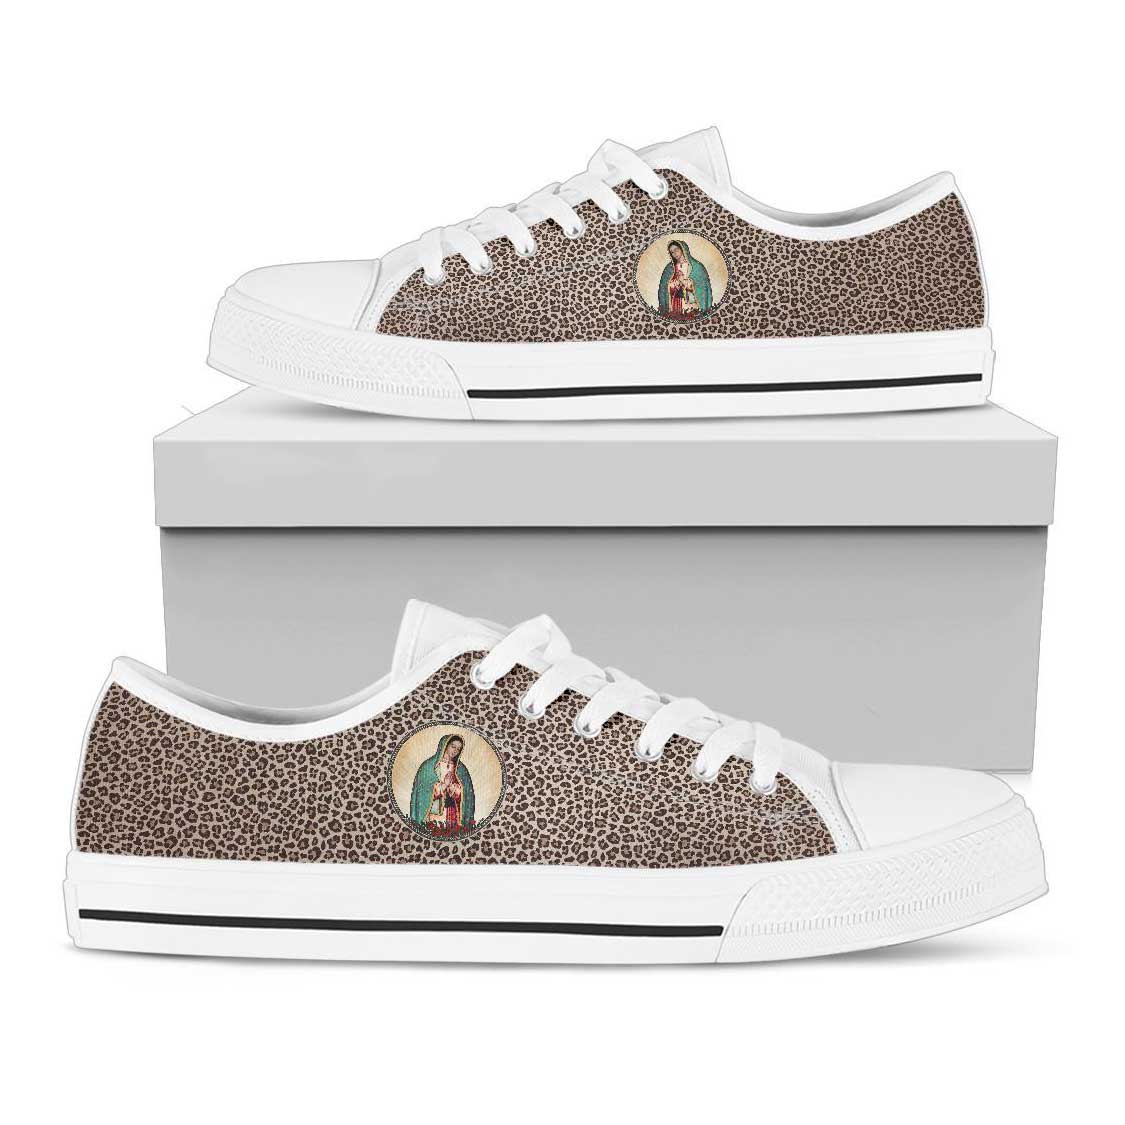 Our Lady of Guadalupe Women's Canvas Low Top Shoes (Leopard) - VENXARA®